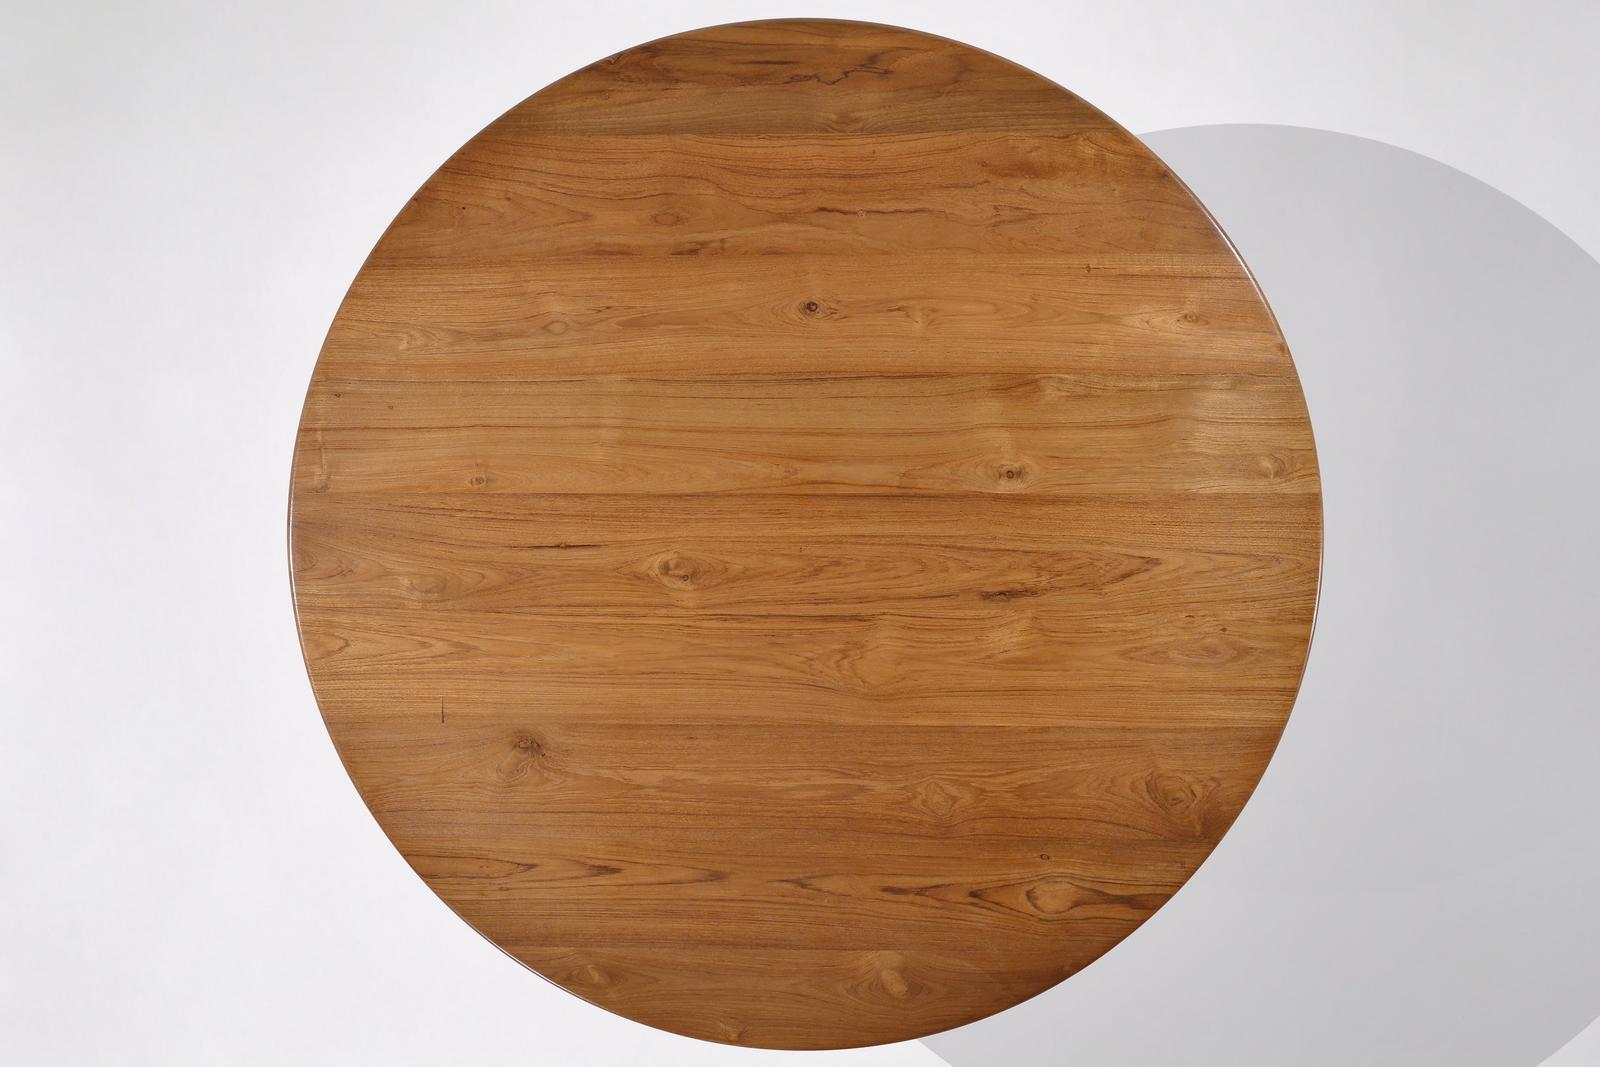 Bespoke Round Table with Wood Base, Reclaimed Teak Wood, by P. Tendercool For Sale 8